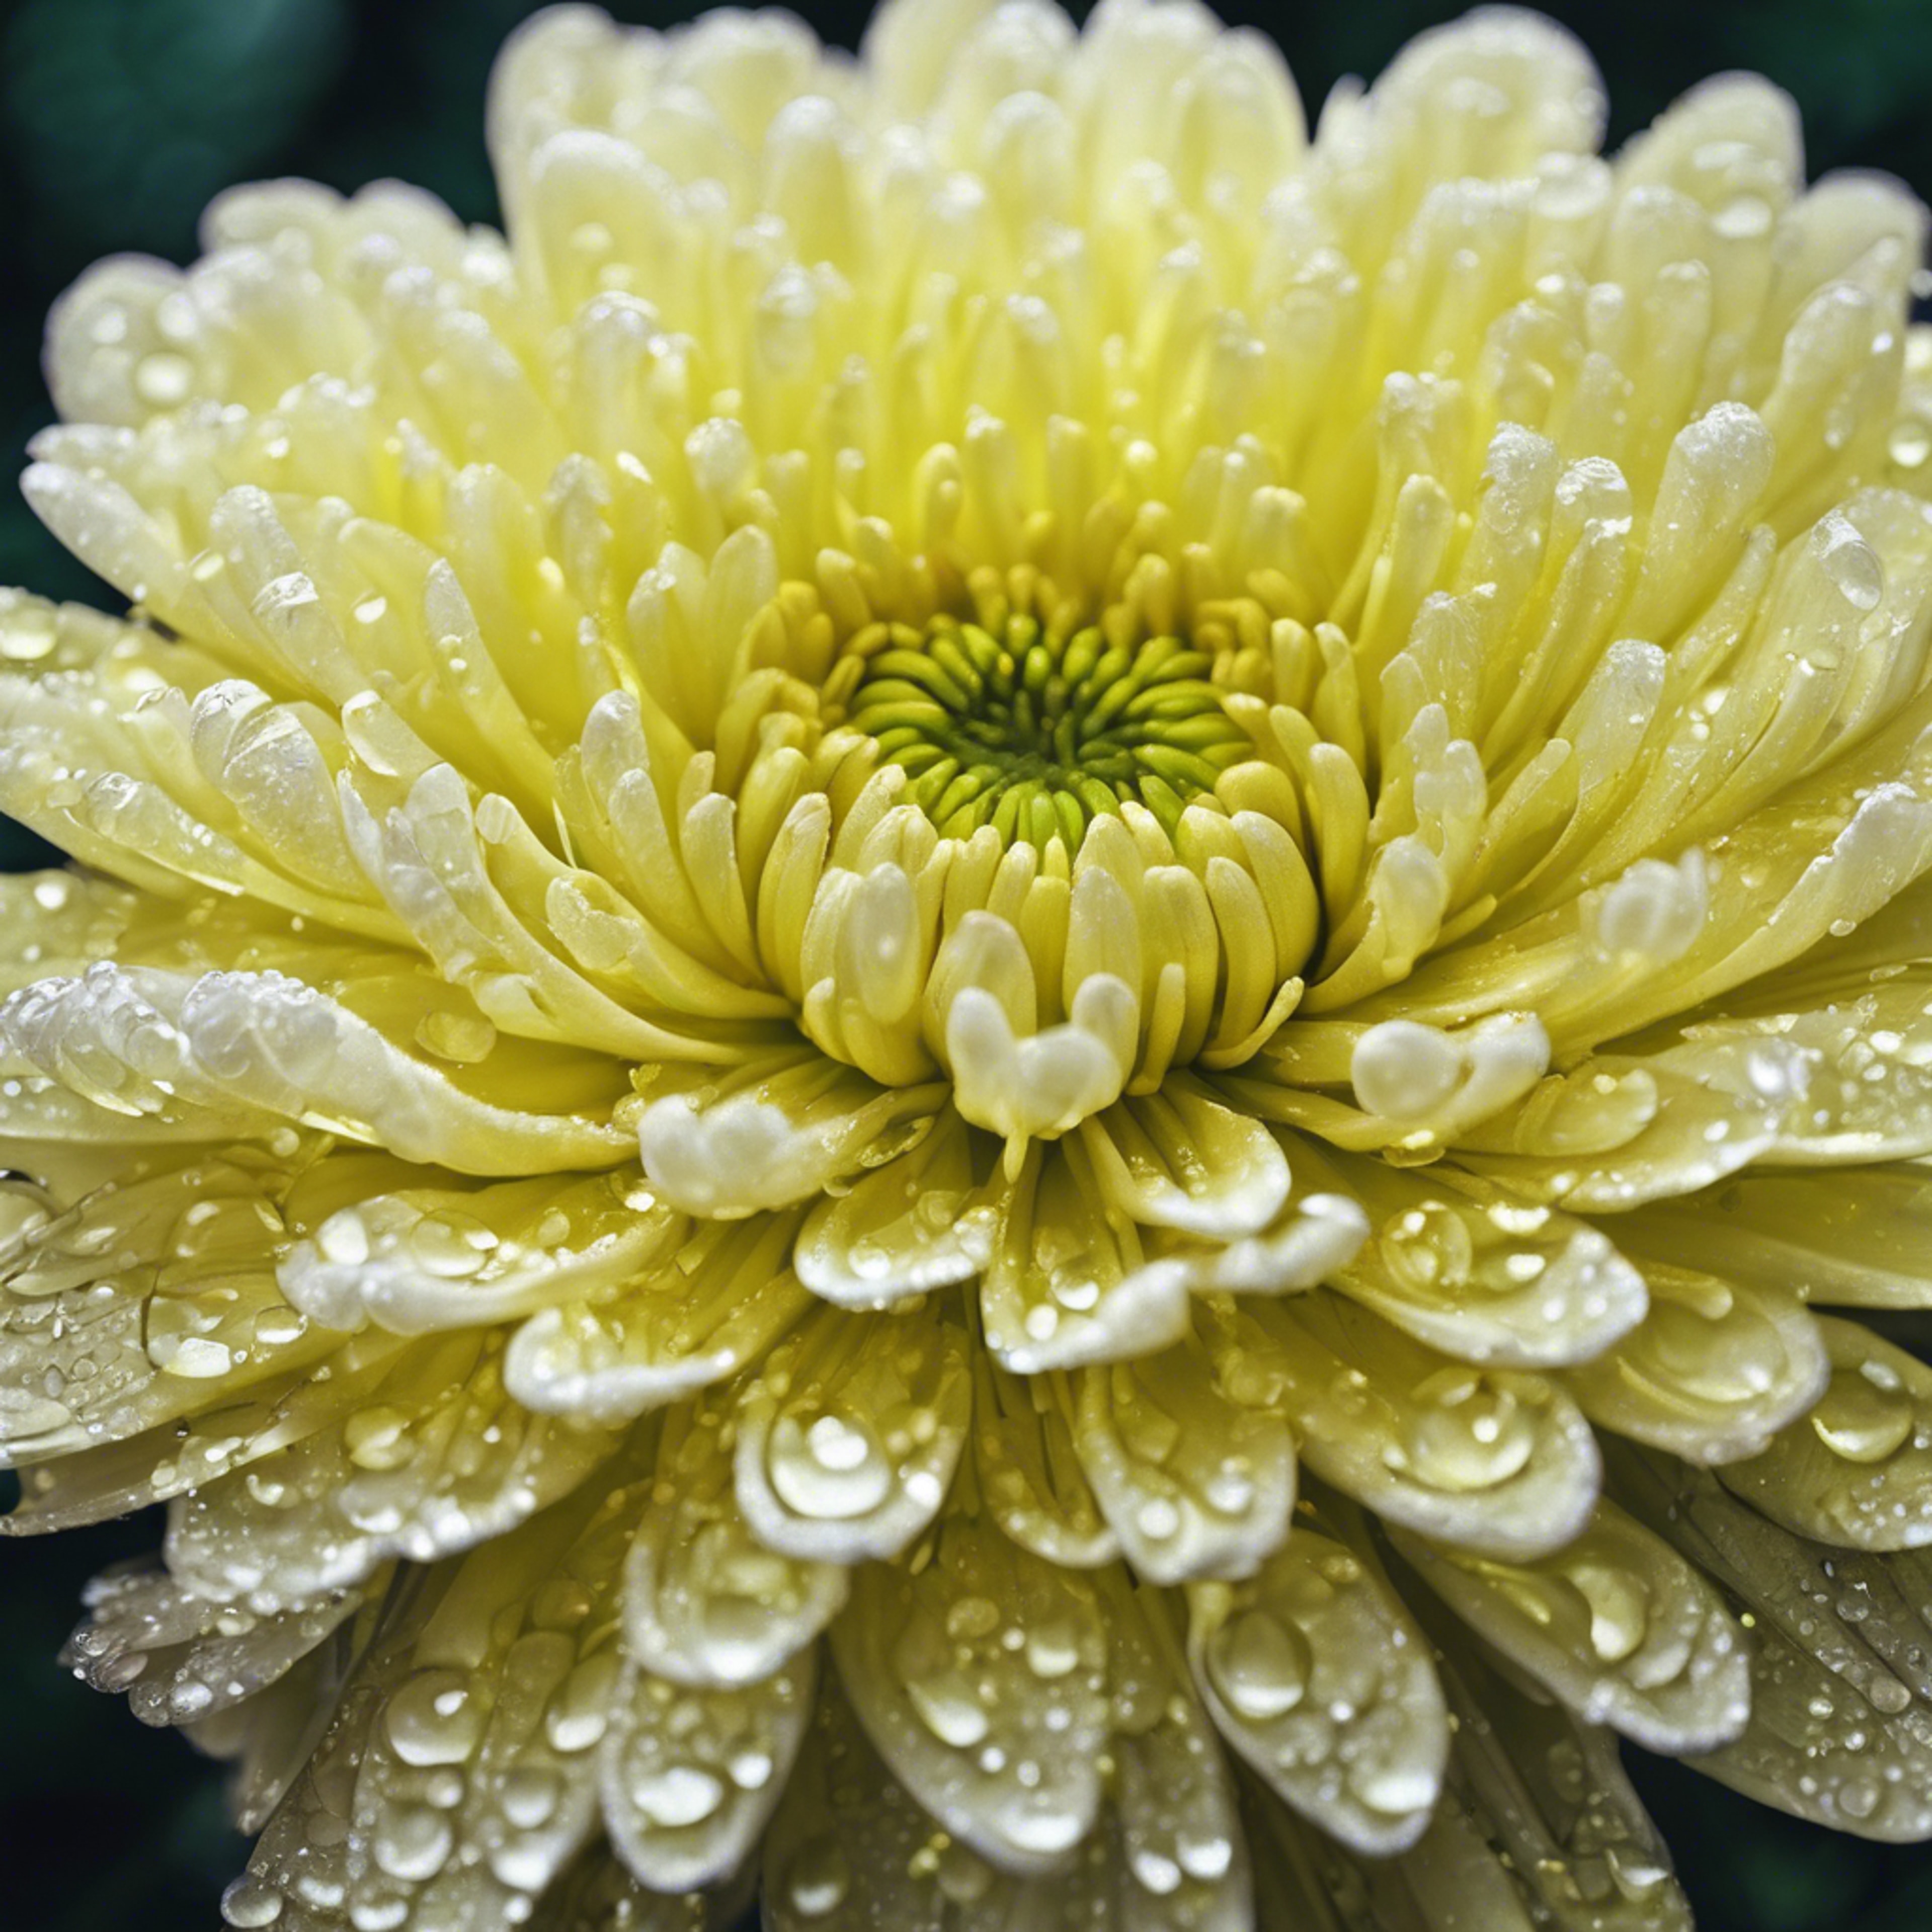 Close up of a neon yellow chrysanthemum with morning dew drops. Wallpaper[0dbc614e1ec6416aa903]